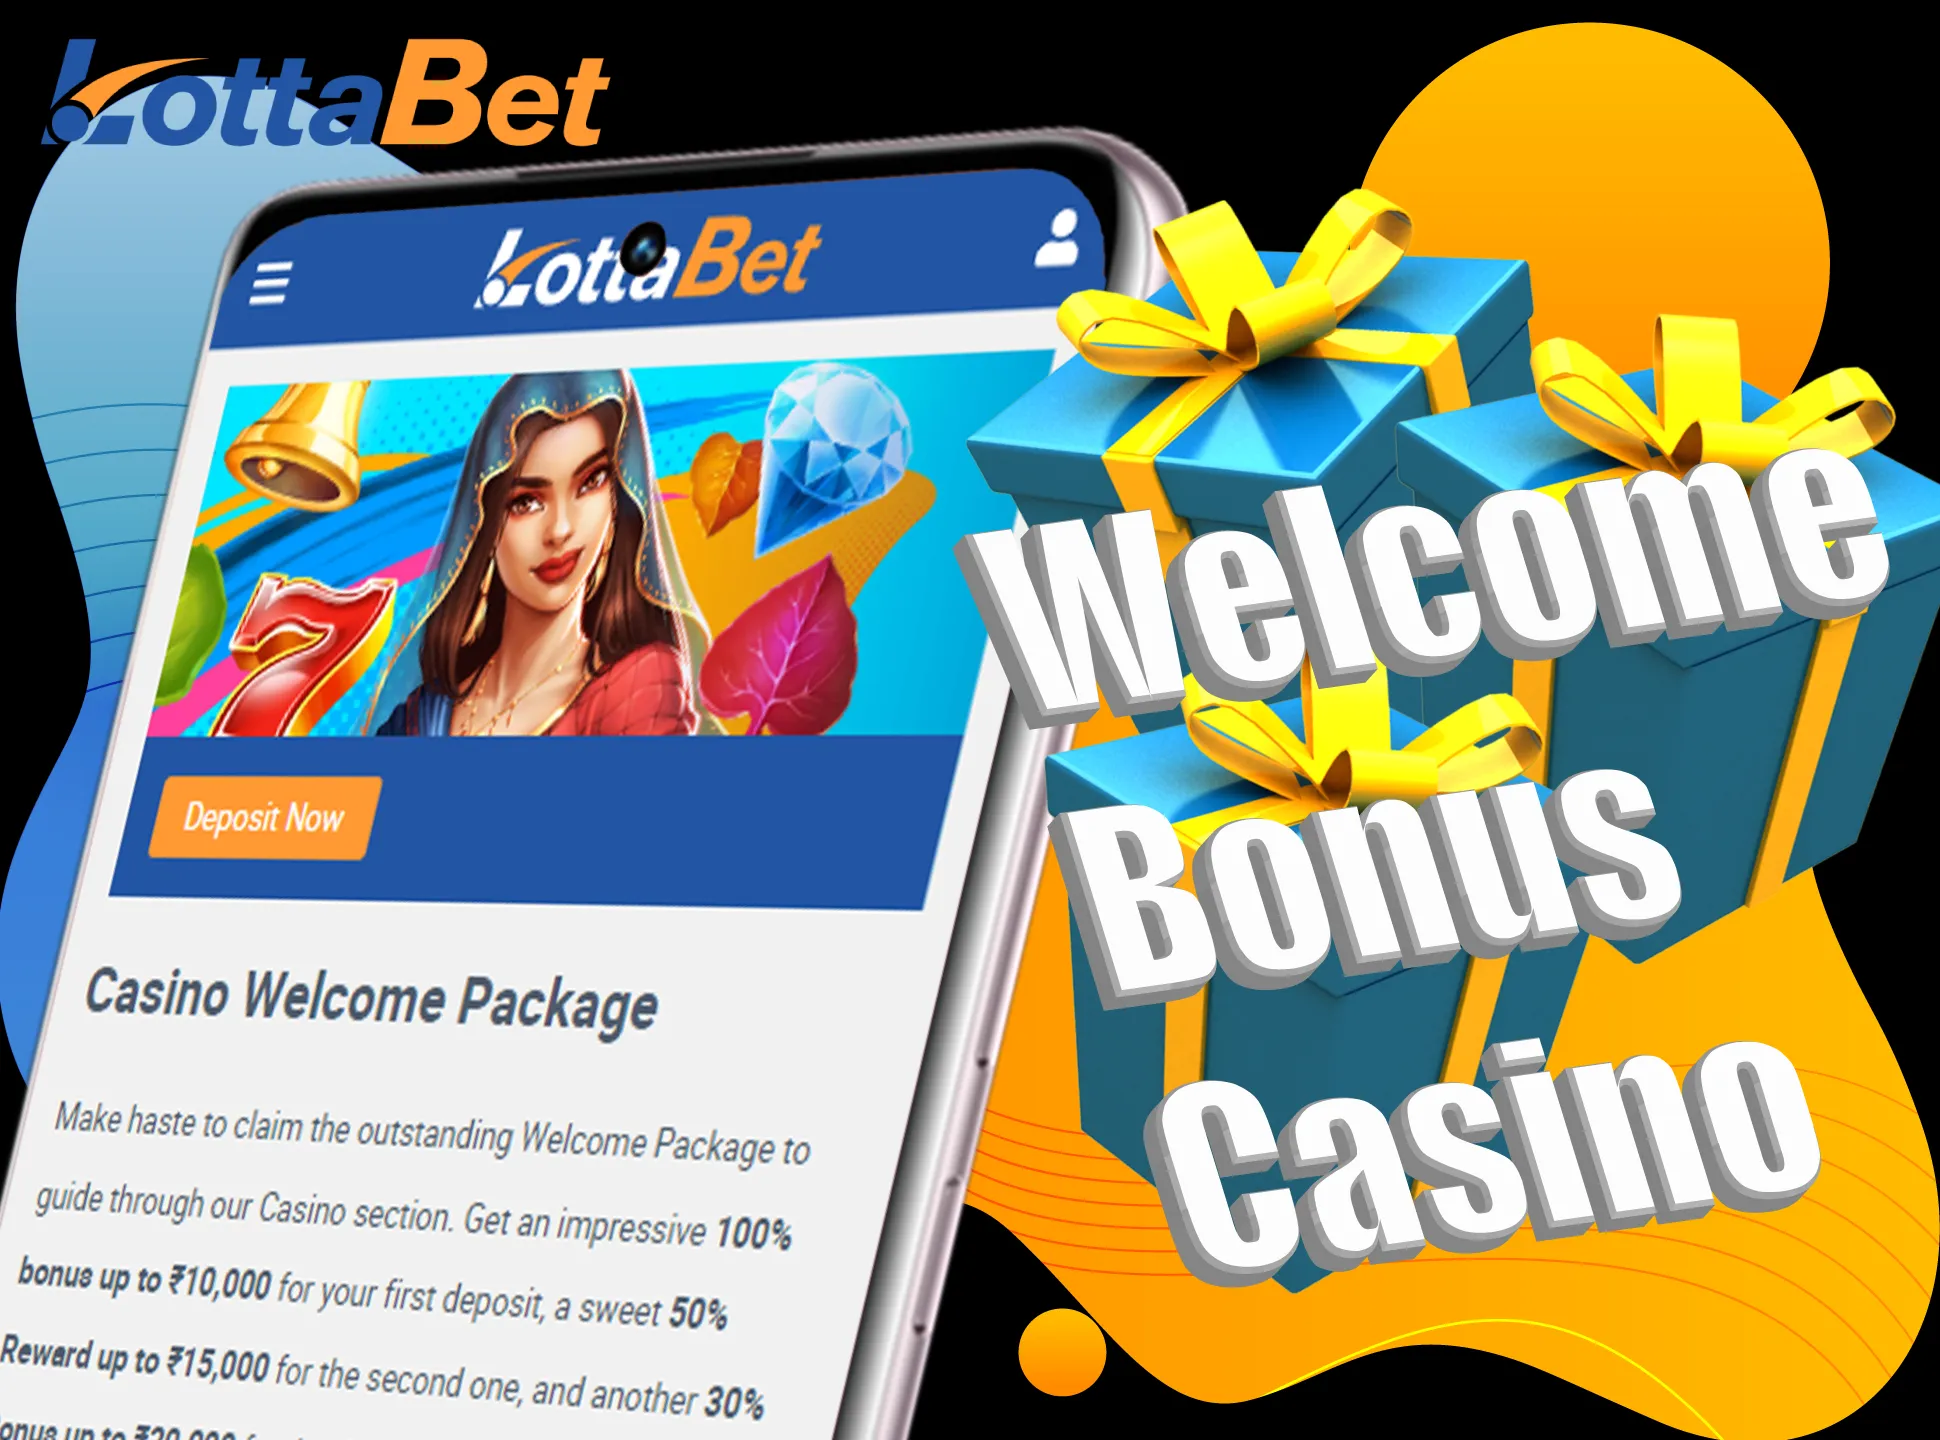 There is also a casino bonus up to 45,000 INR at Lottabet.